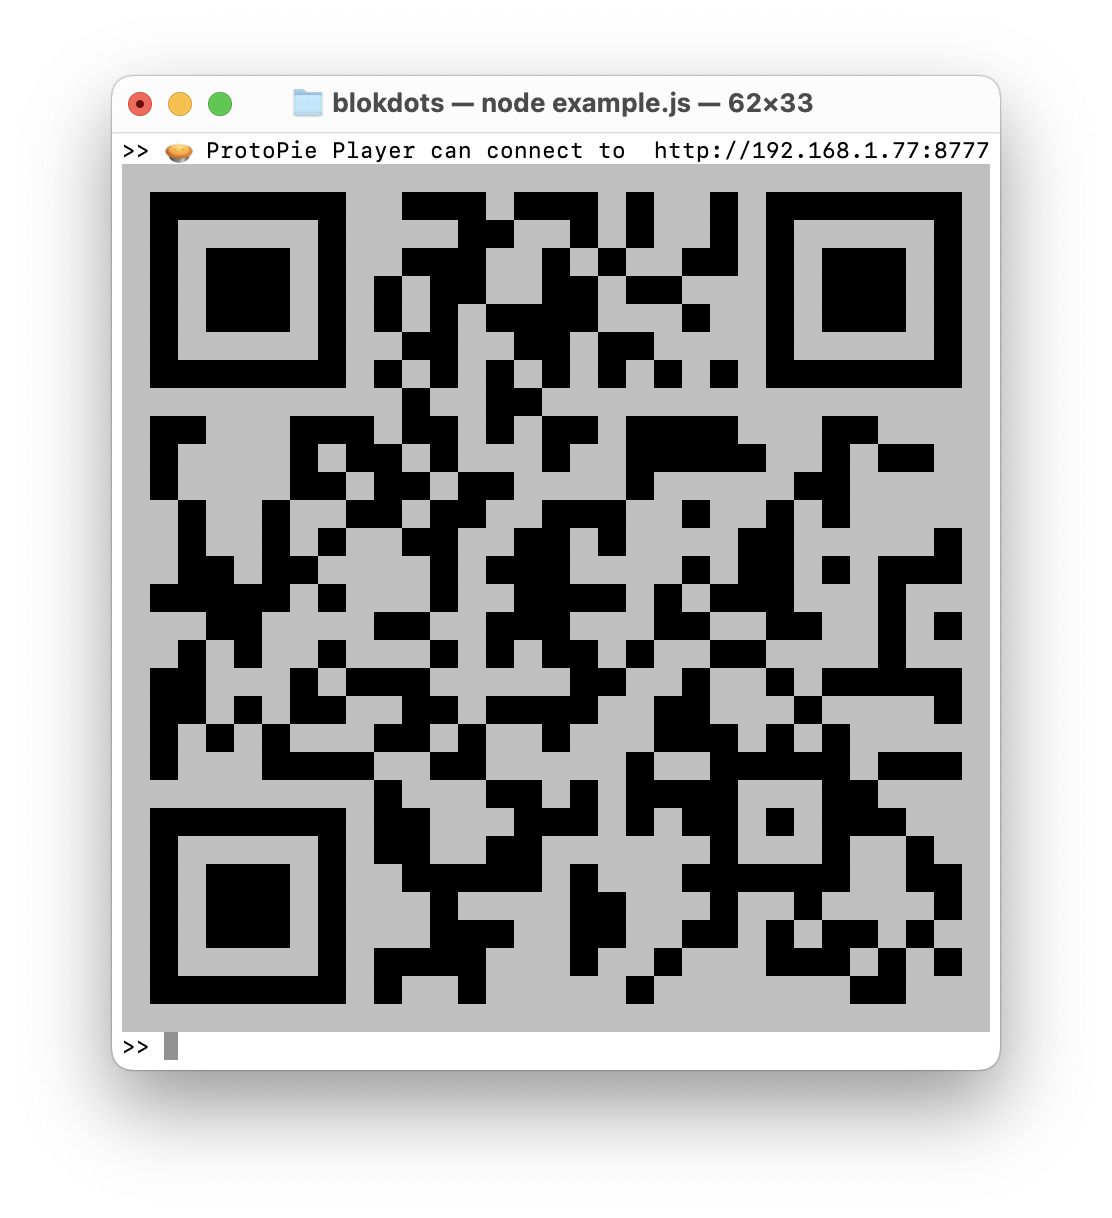 QR code for ProtoPie Player in the terminal window